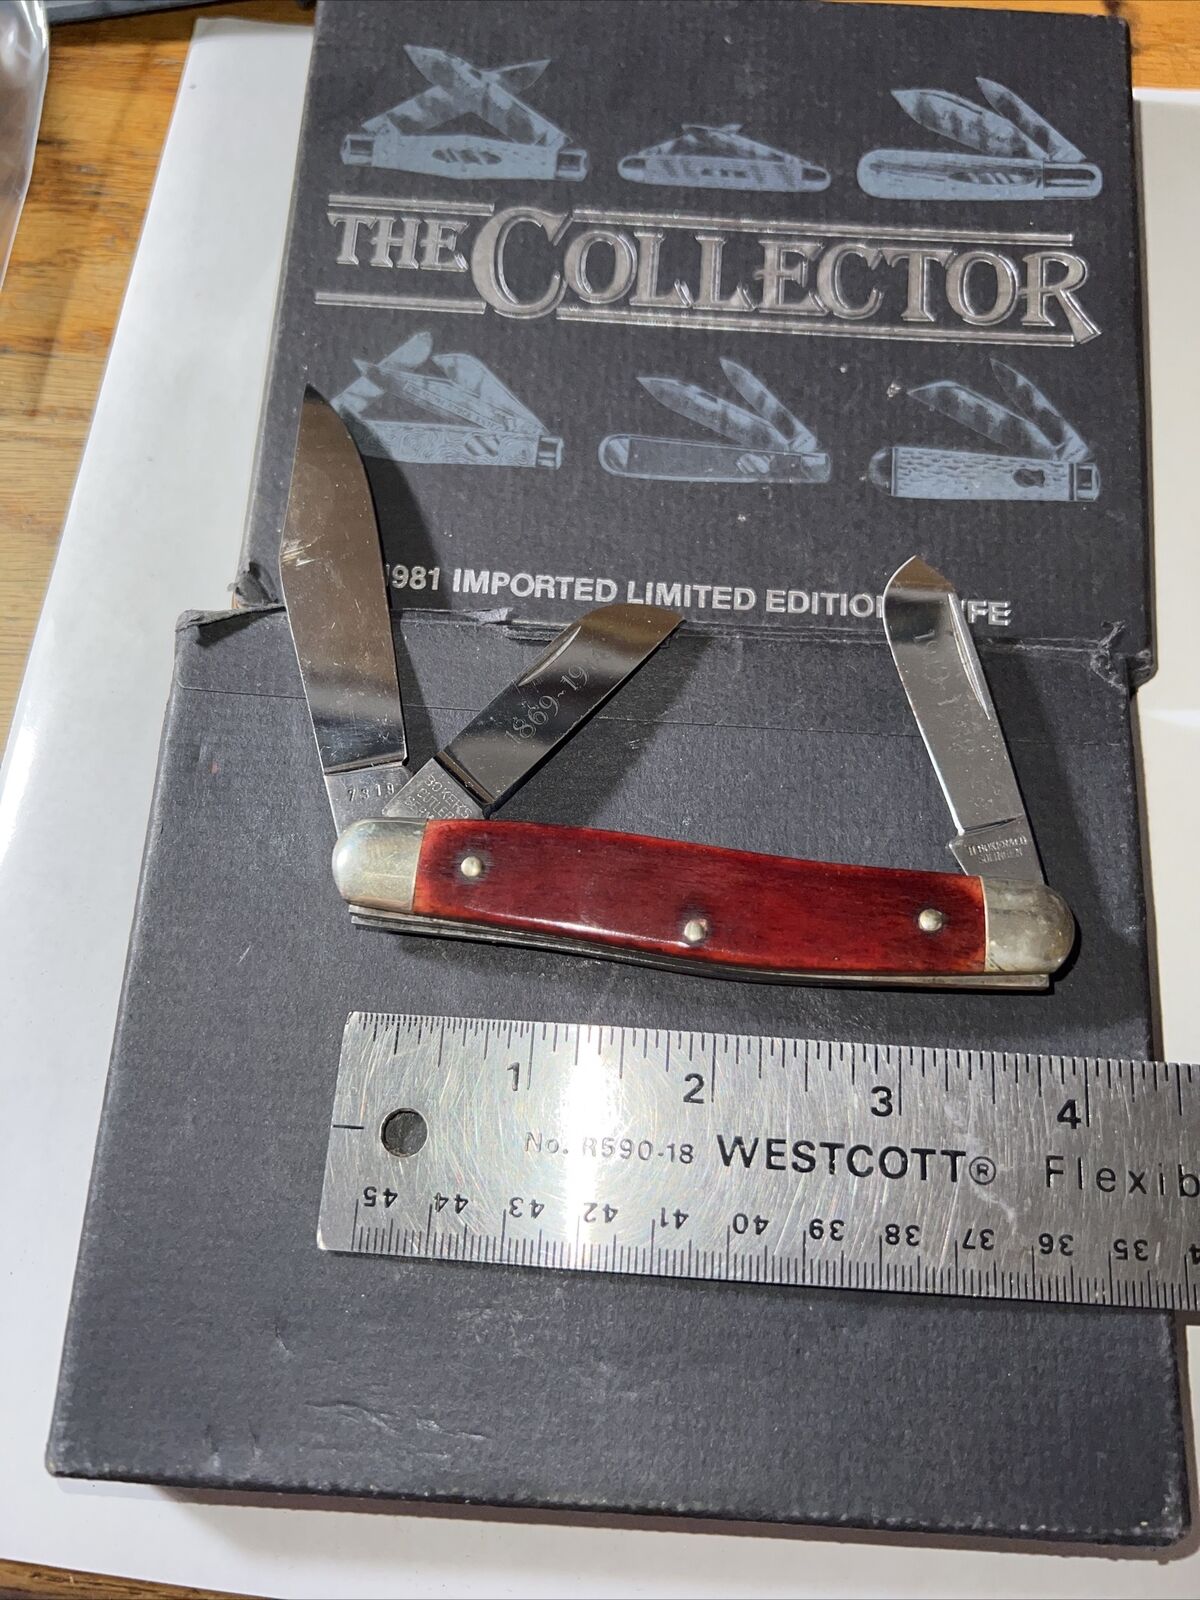 COOL BEANS The Collector Boker 1981 Imported Limited Edition Knife K-73